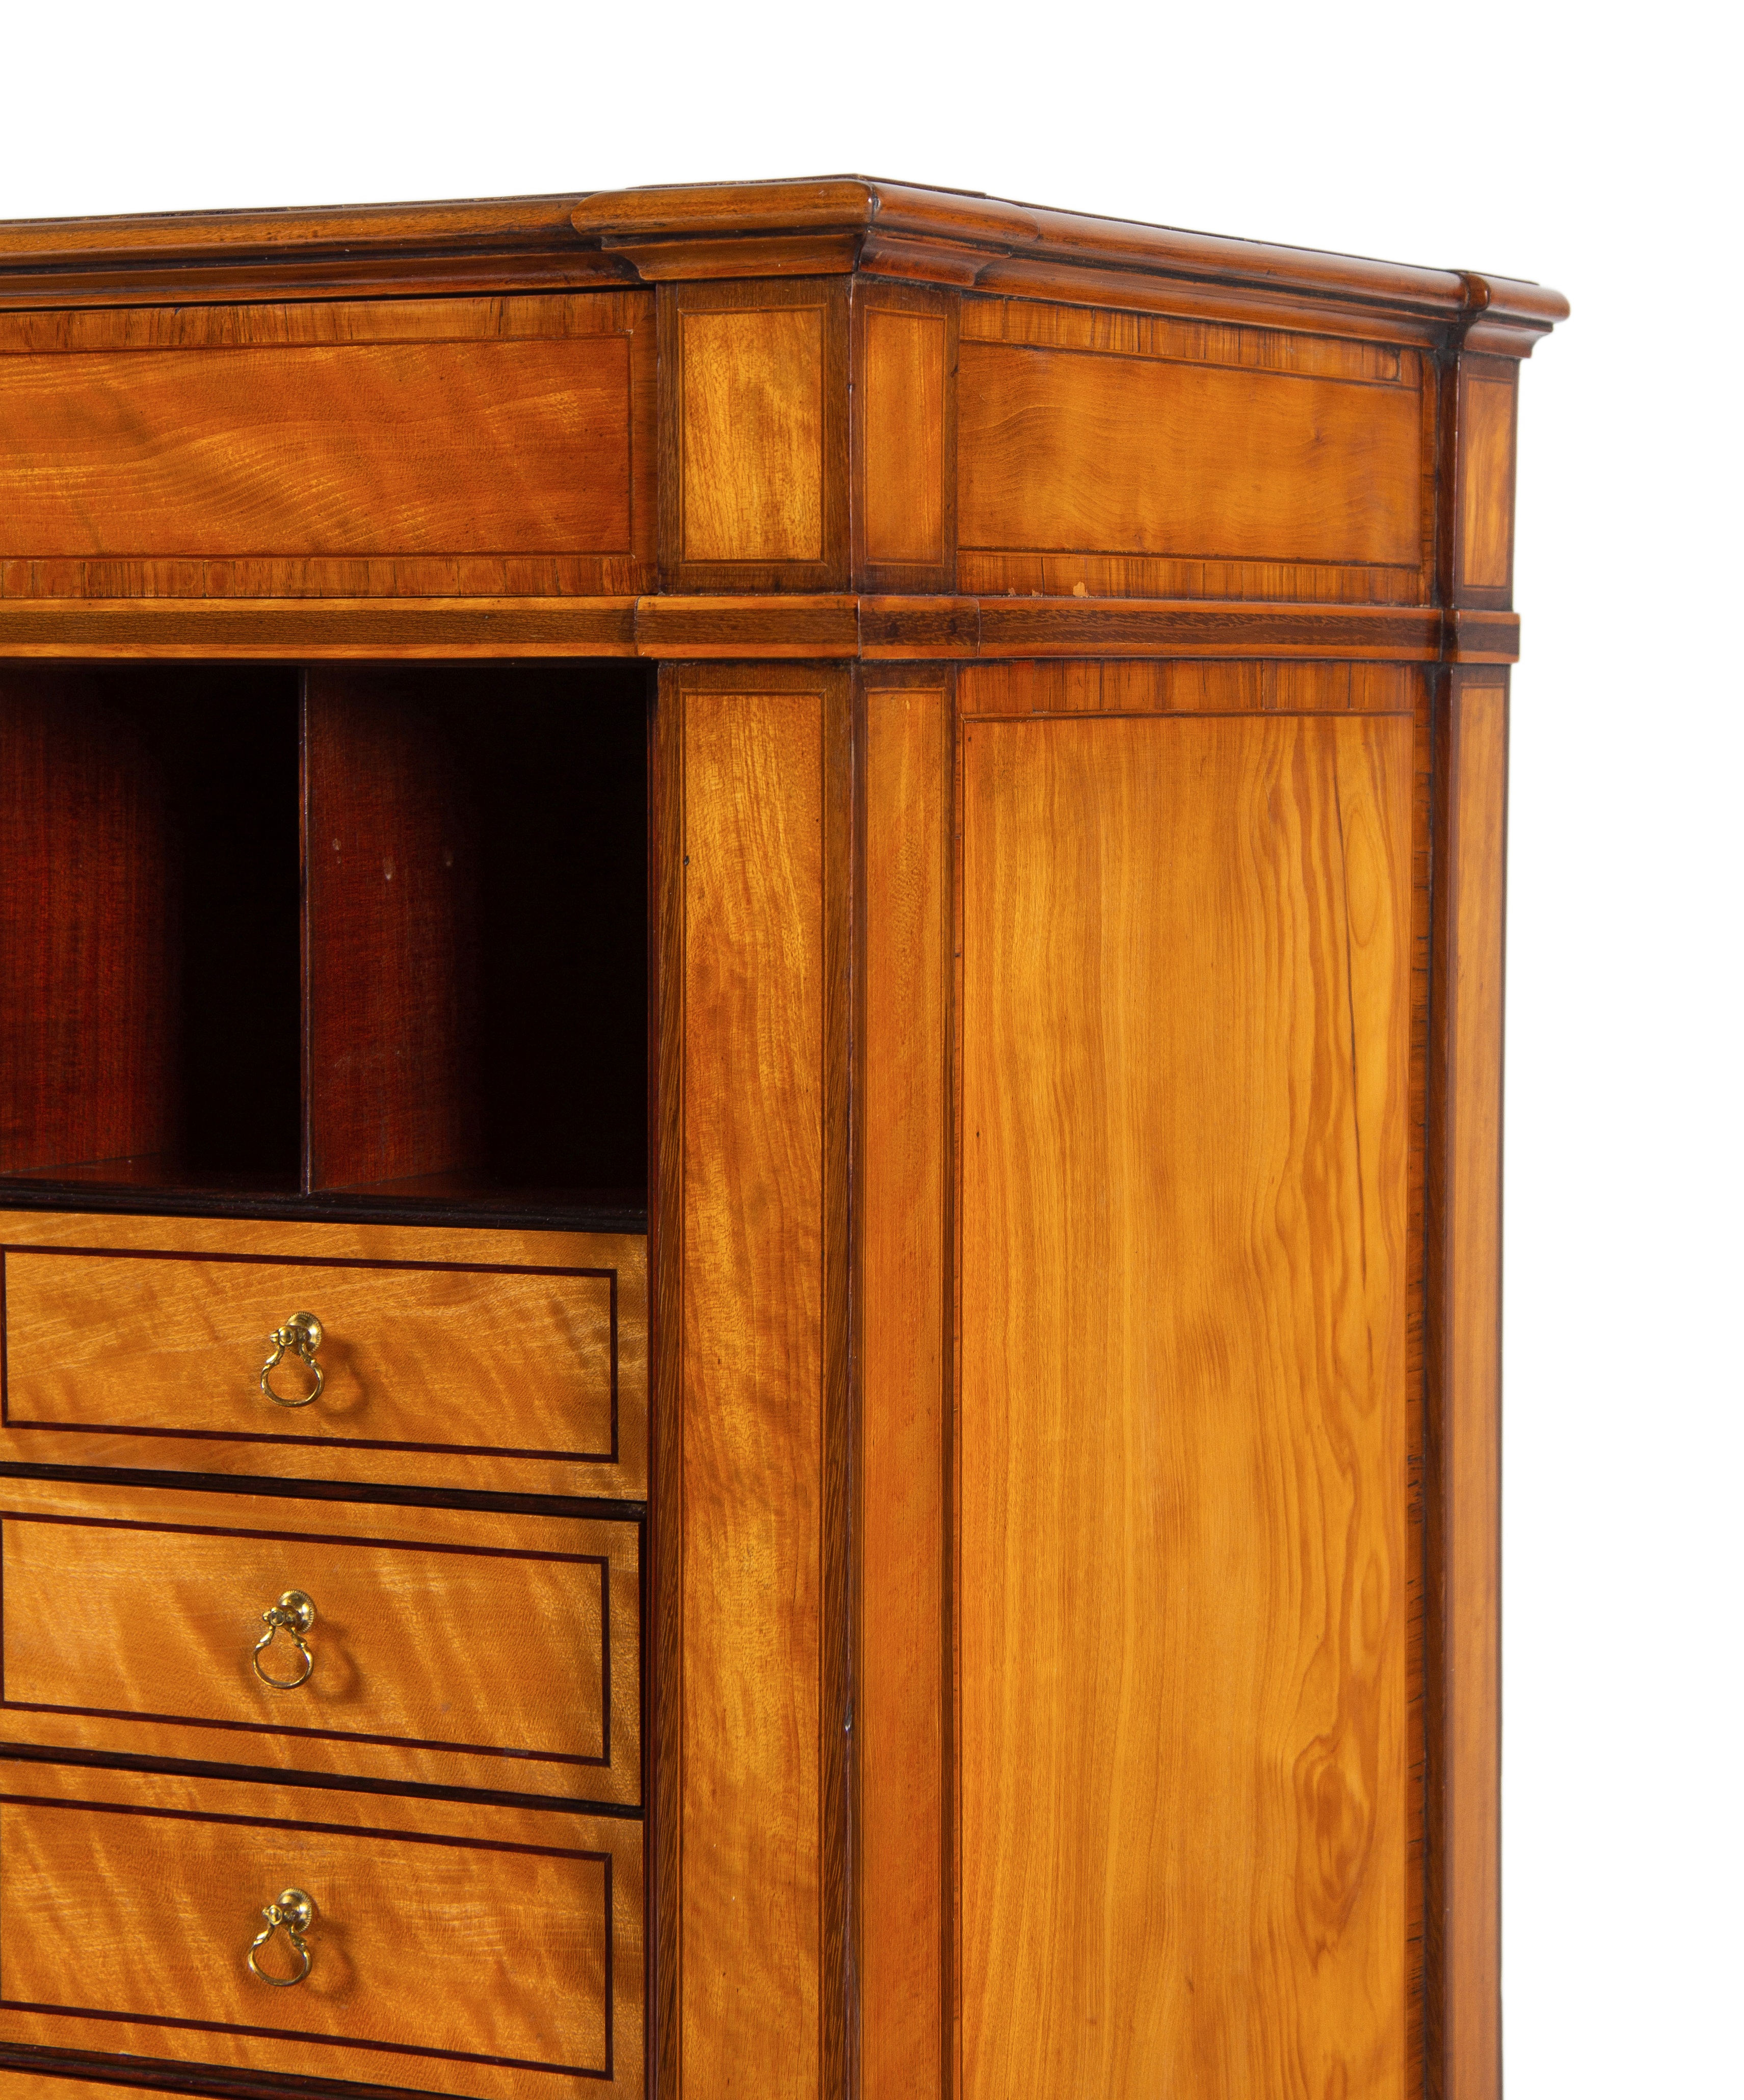 A George III Satinwood, Tulipwood and Amaranth Marquetry Fall-Front Secretaire - Image 7 of 11